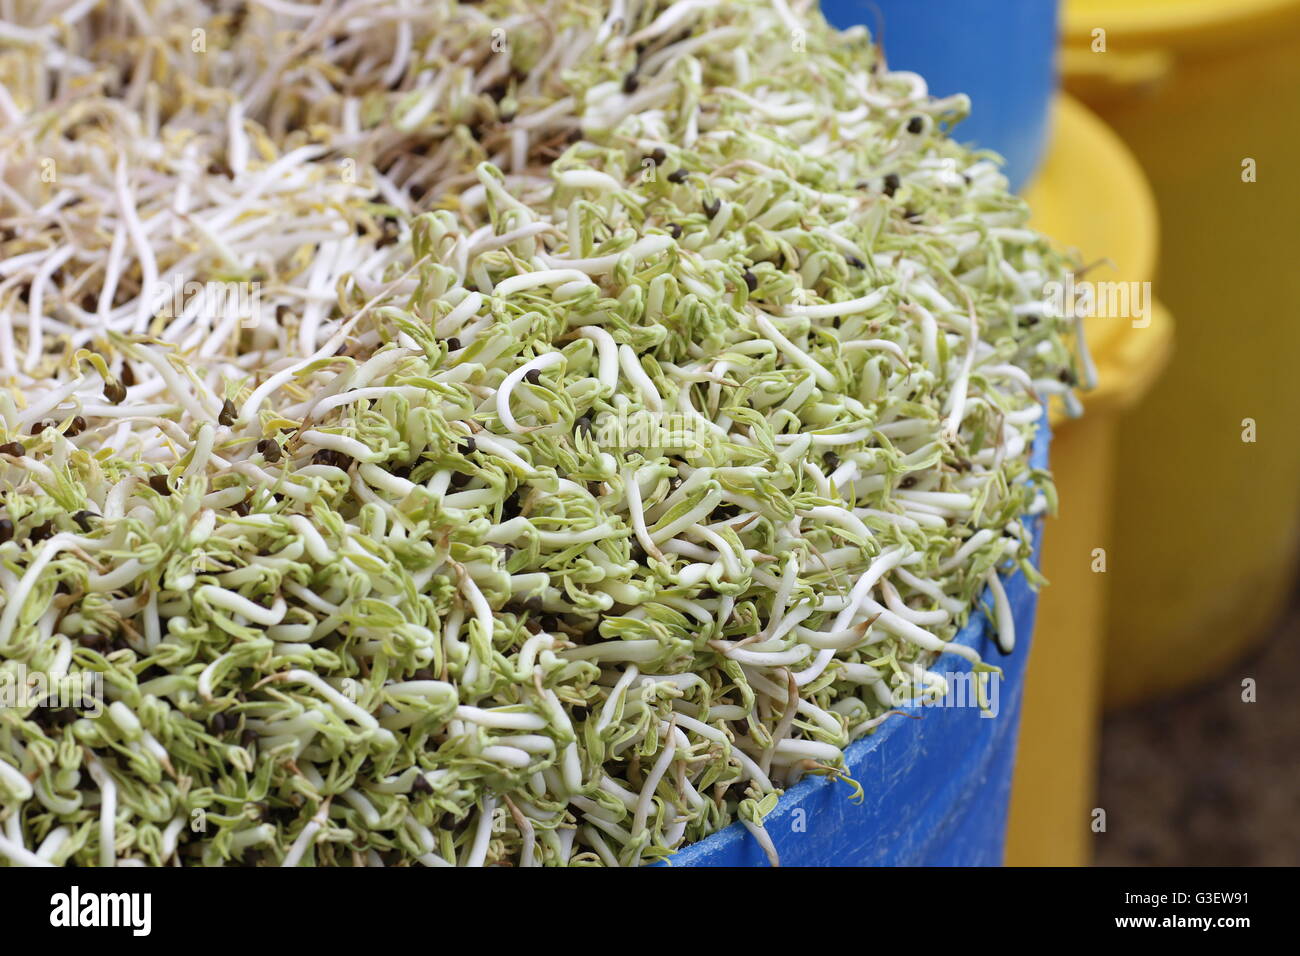 bean sprouts made from the greenish-capped mung beans being sprouted in  a container Stock Photo